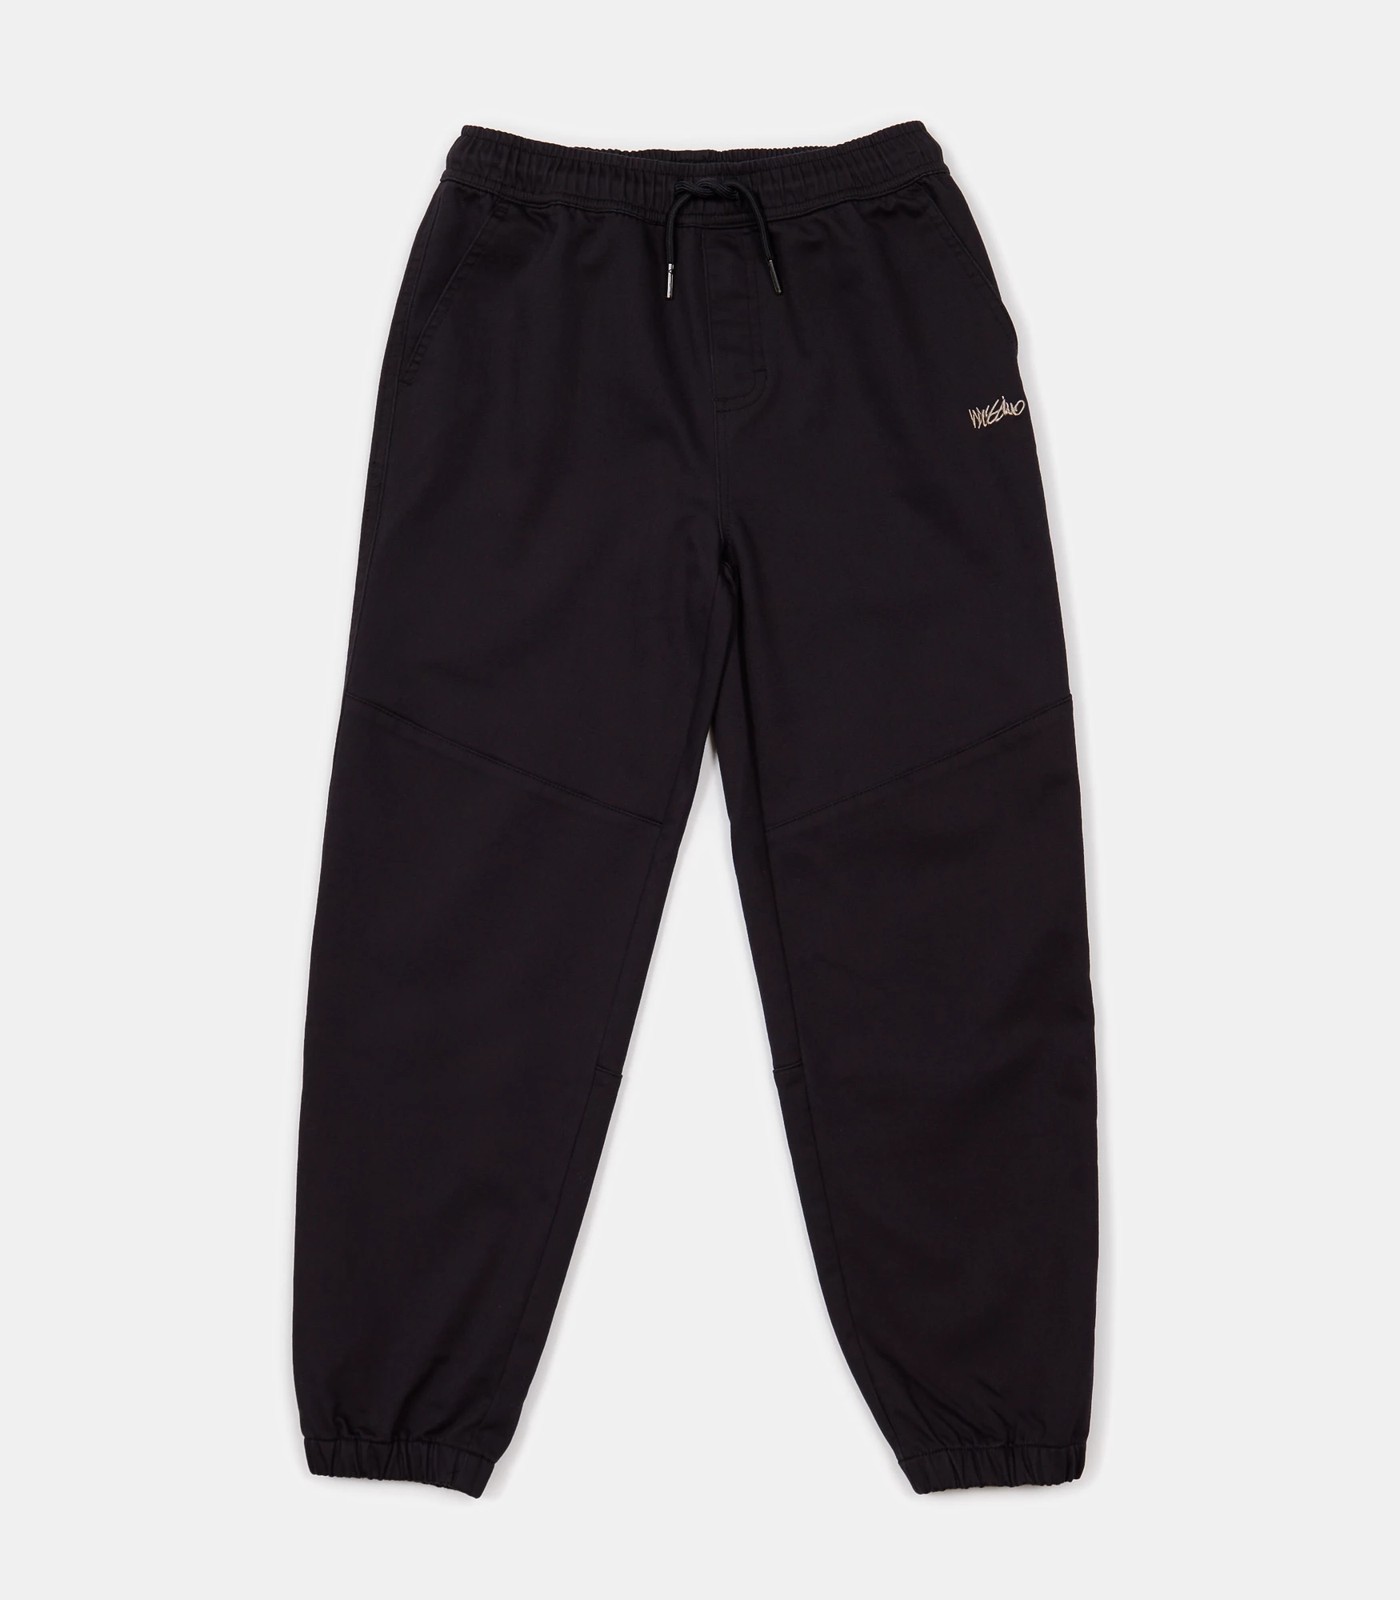 Mossimo Athletic Pants